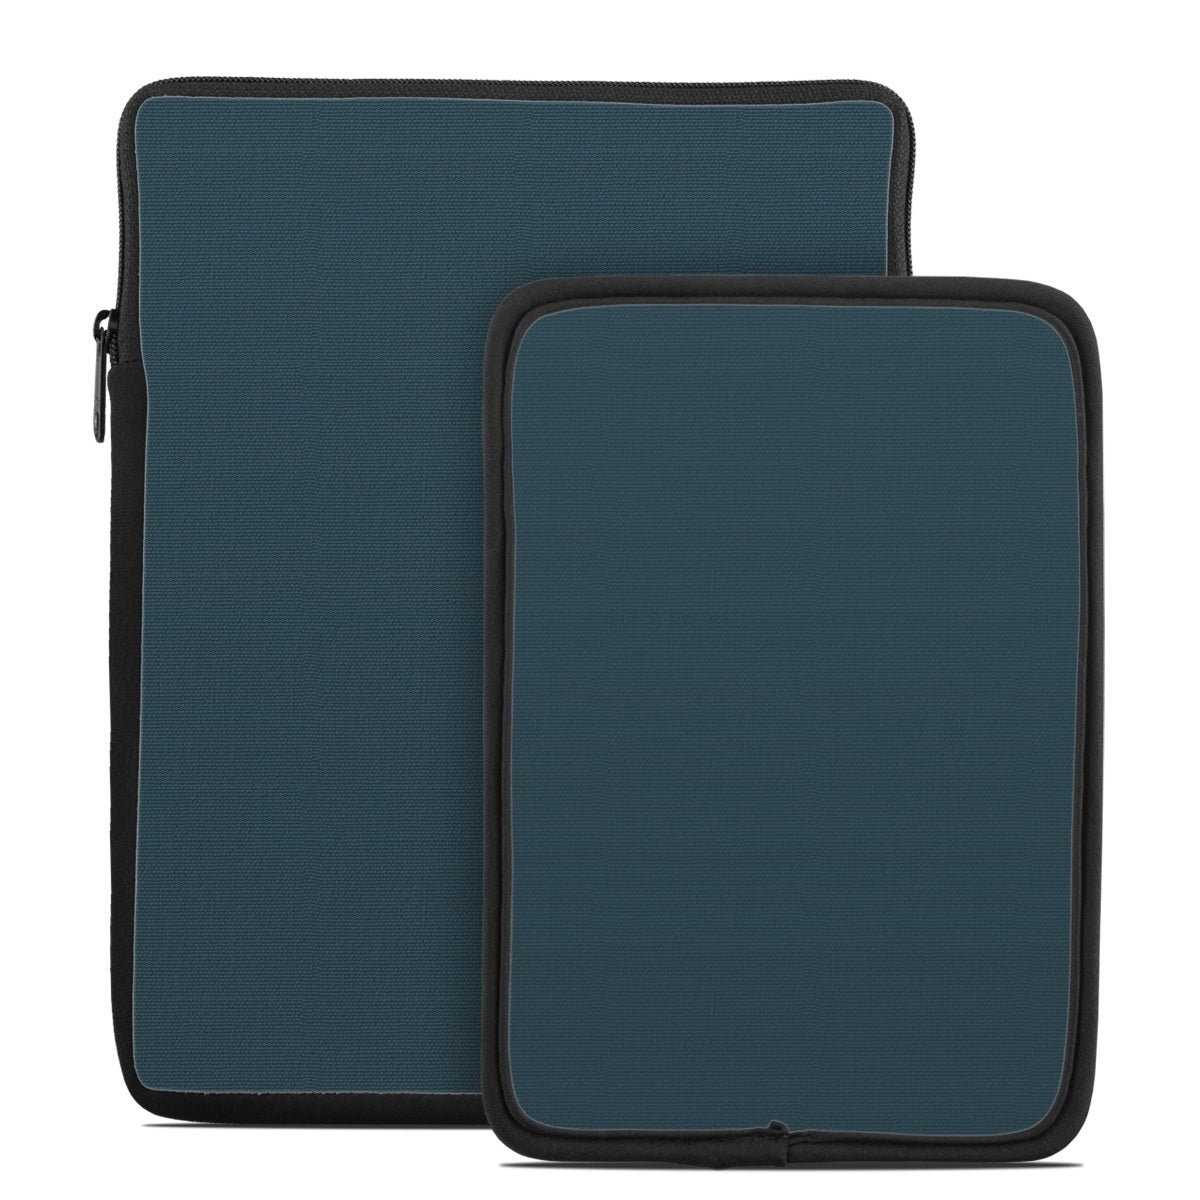 Solid State Storm - Tablet Sleeve